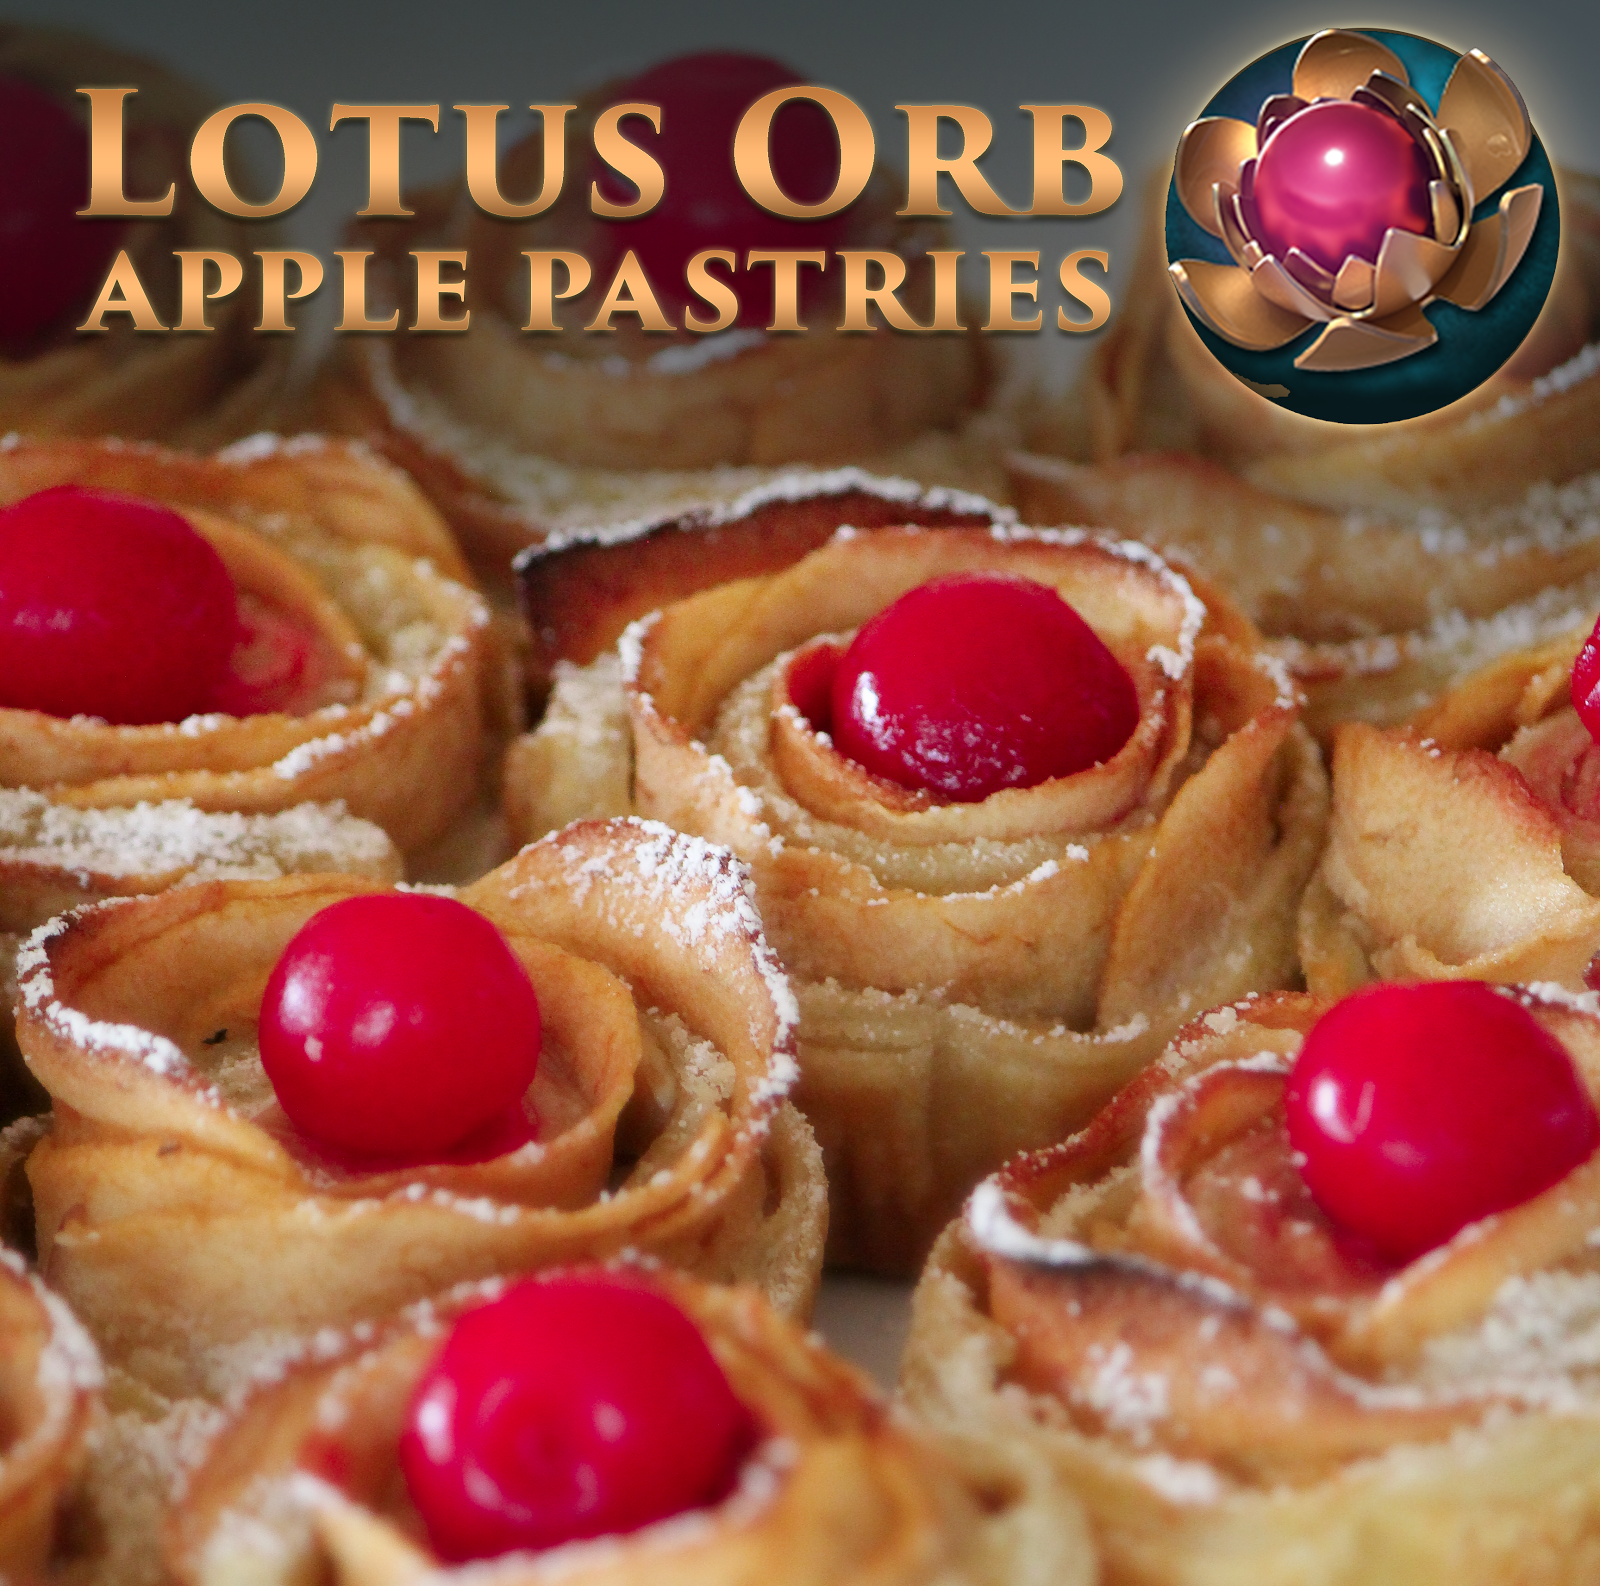 Dota 2 Lotus Orbs made from apples and puff pastry, topped with a cherry! Situational item, core for a Dota 2 party.